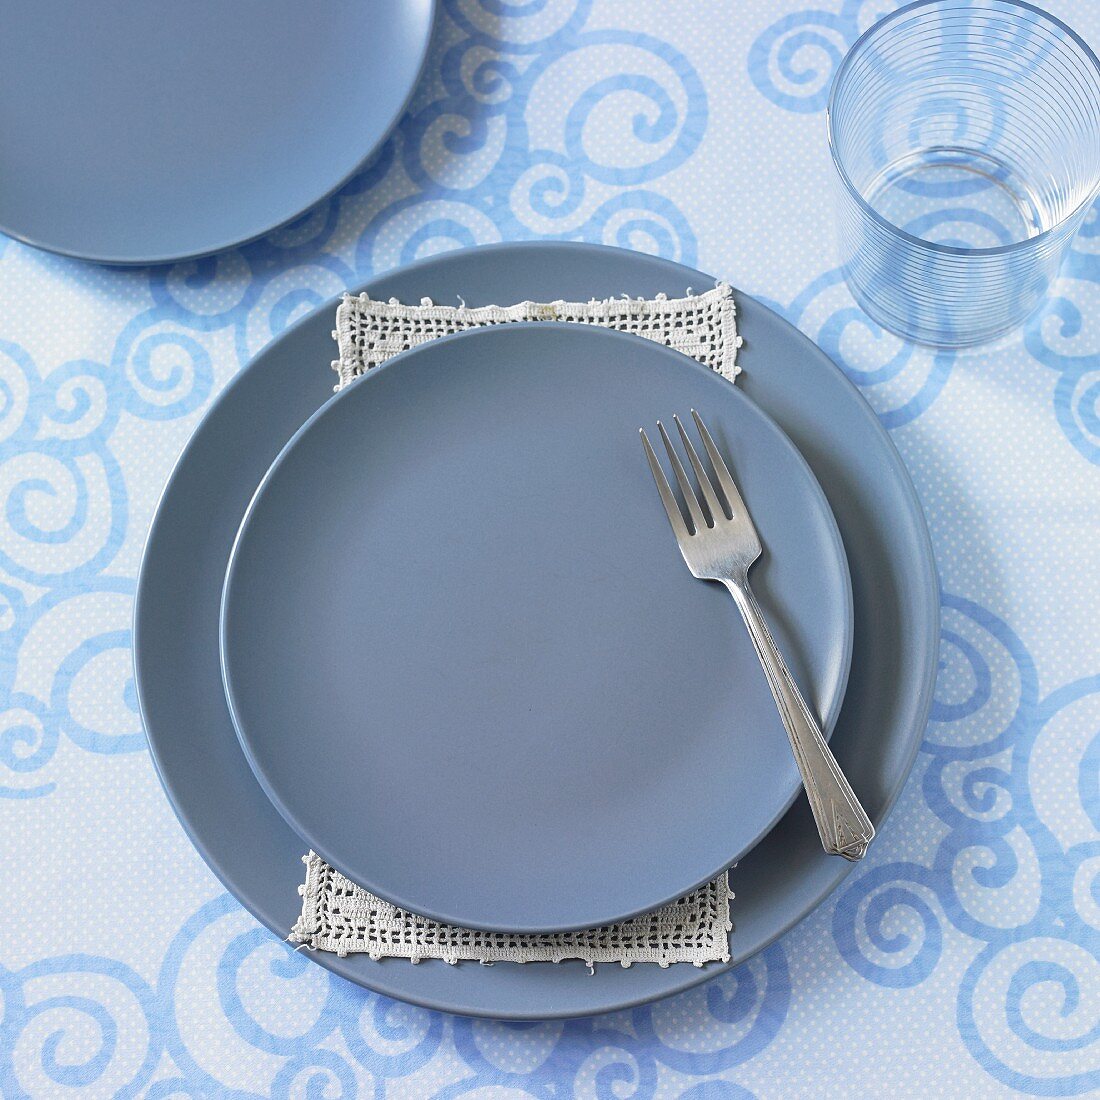 A place setting with blue plates and a fork (seen from above)